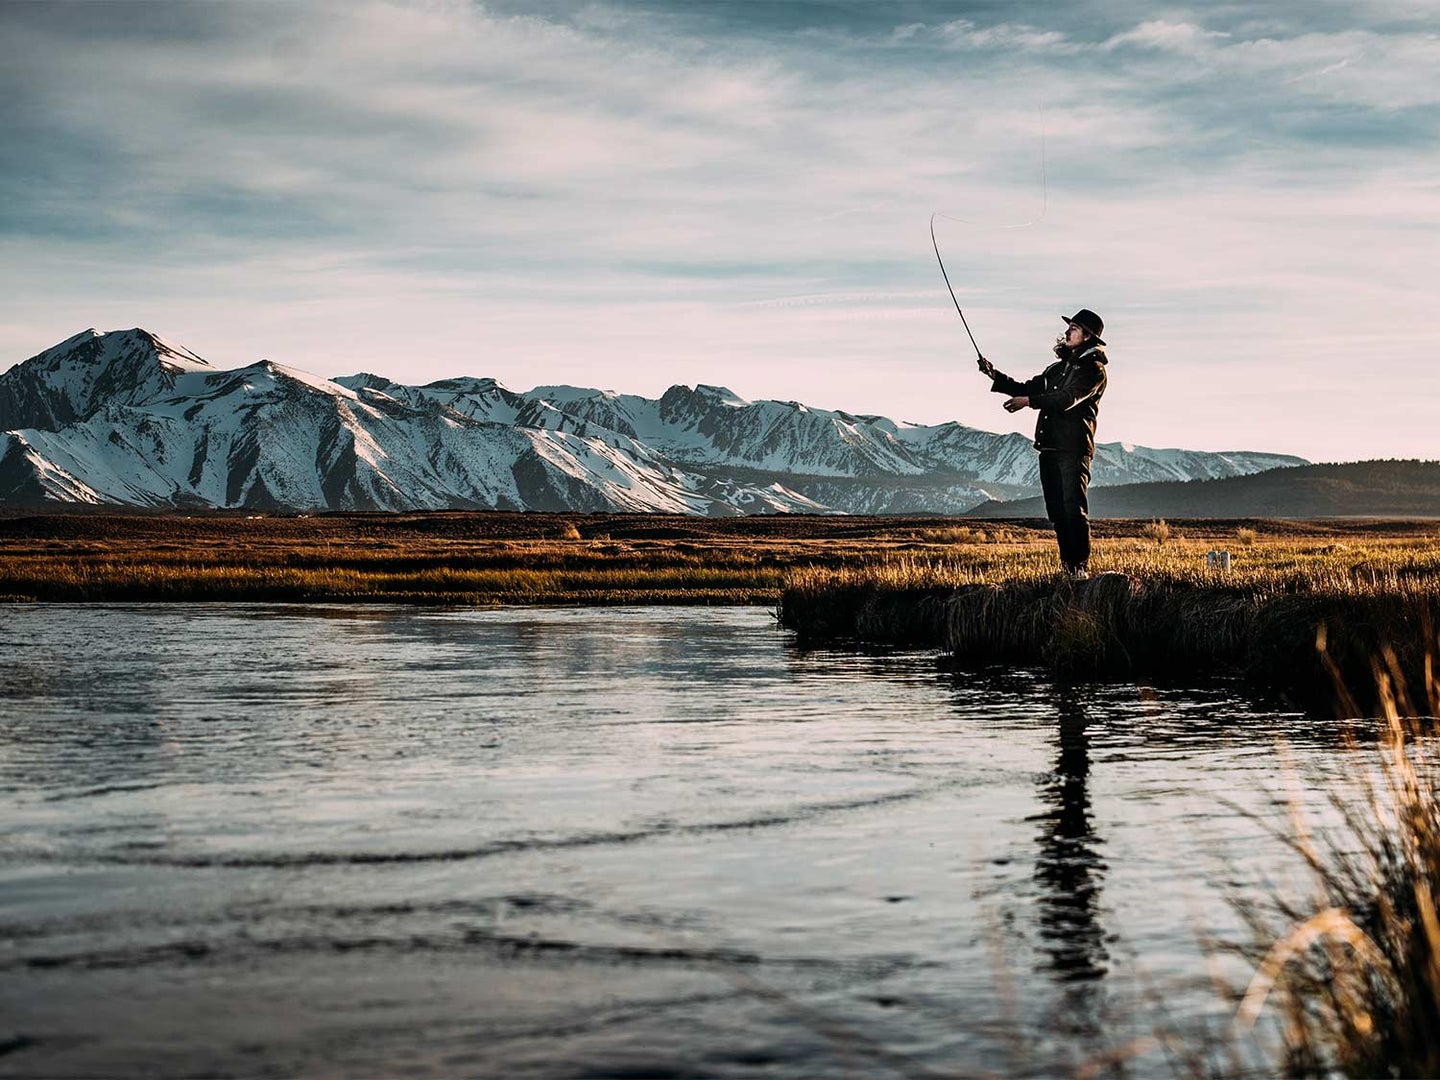 An angler fishing a river side with snowy mountains in the distance.